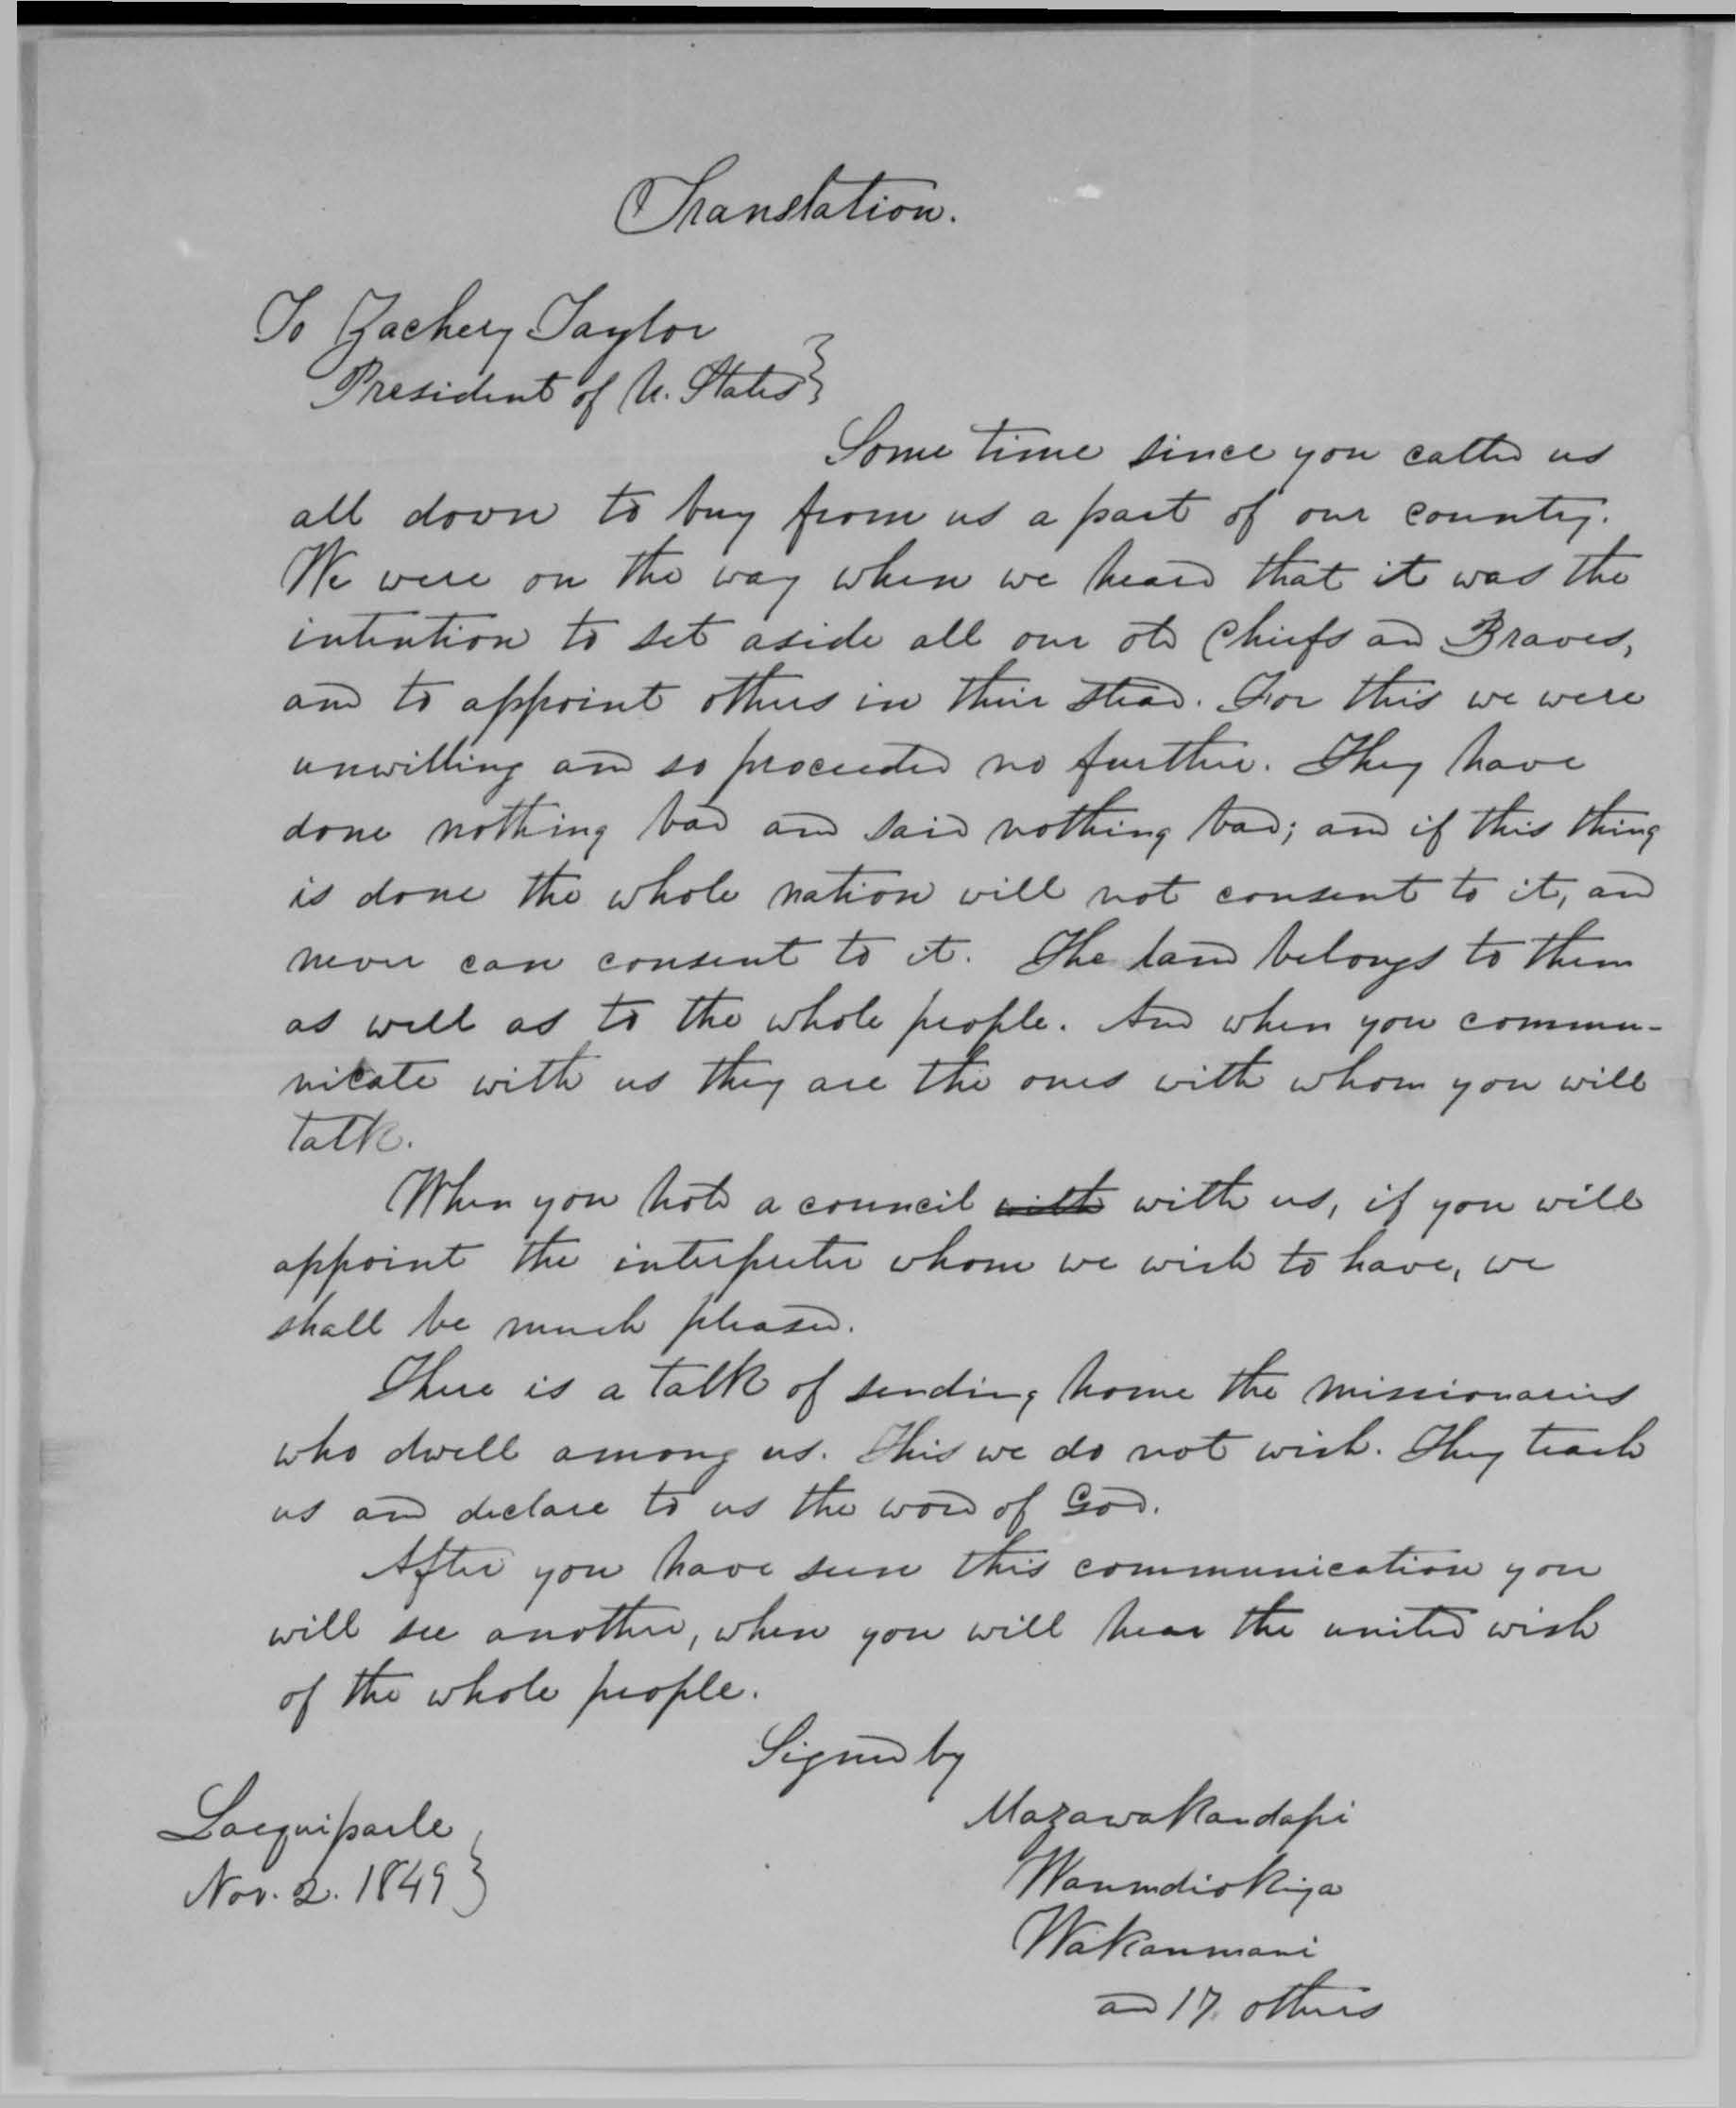 Image of letter from Dakota Indians at Lac qui Parle to Zachary Taylor, Nov. 2, 1849